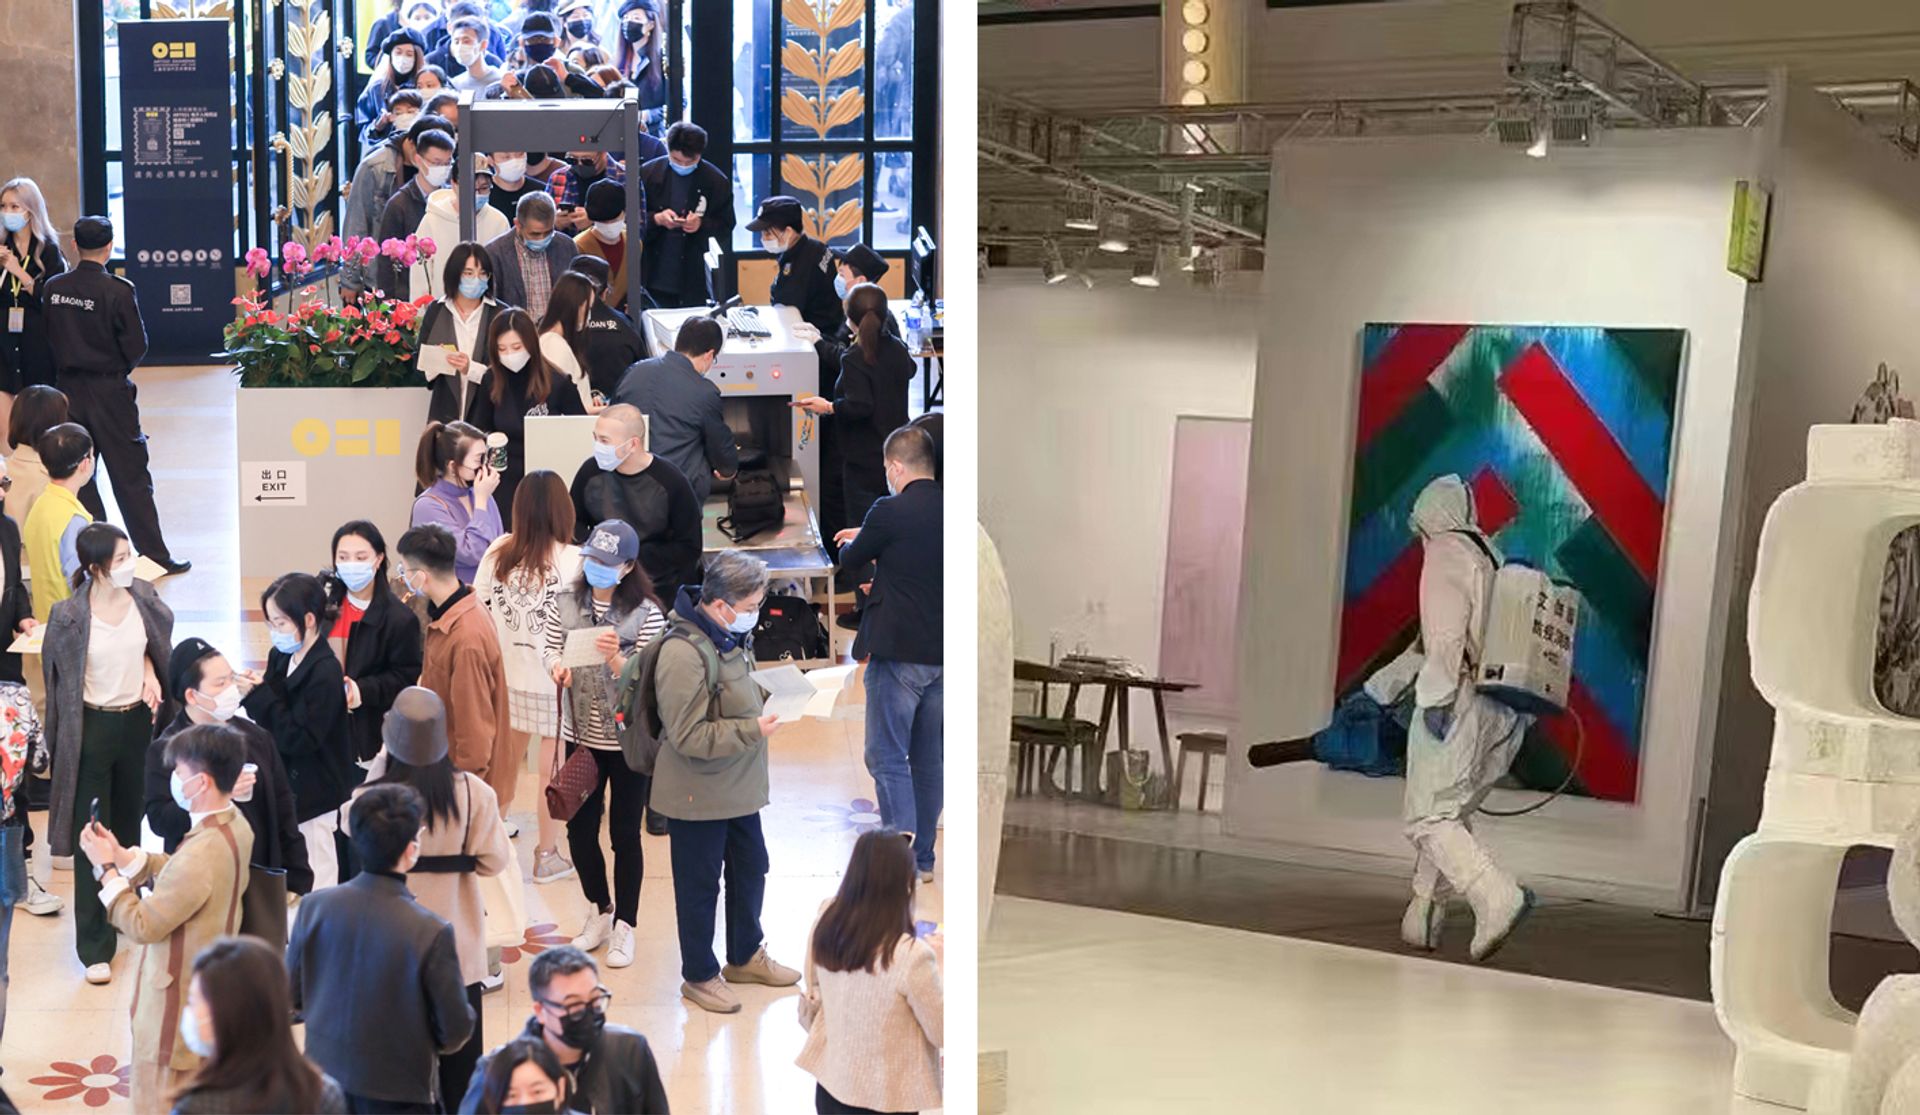 Crowds which gathered yesterday at Art021 Shanghai (pictured left) were evacuated today for a sudden disinfection of the entire site (pictured right). L: Courtesy of Art021; R: Wechat